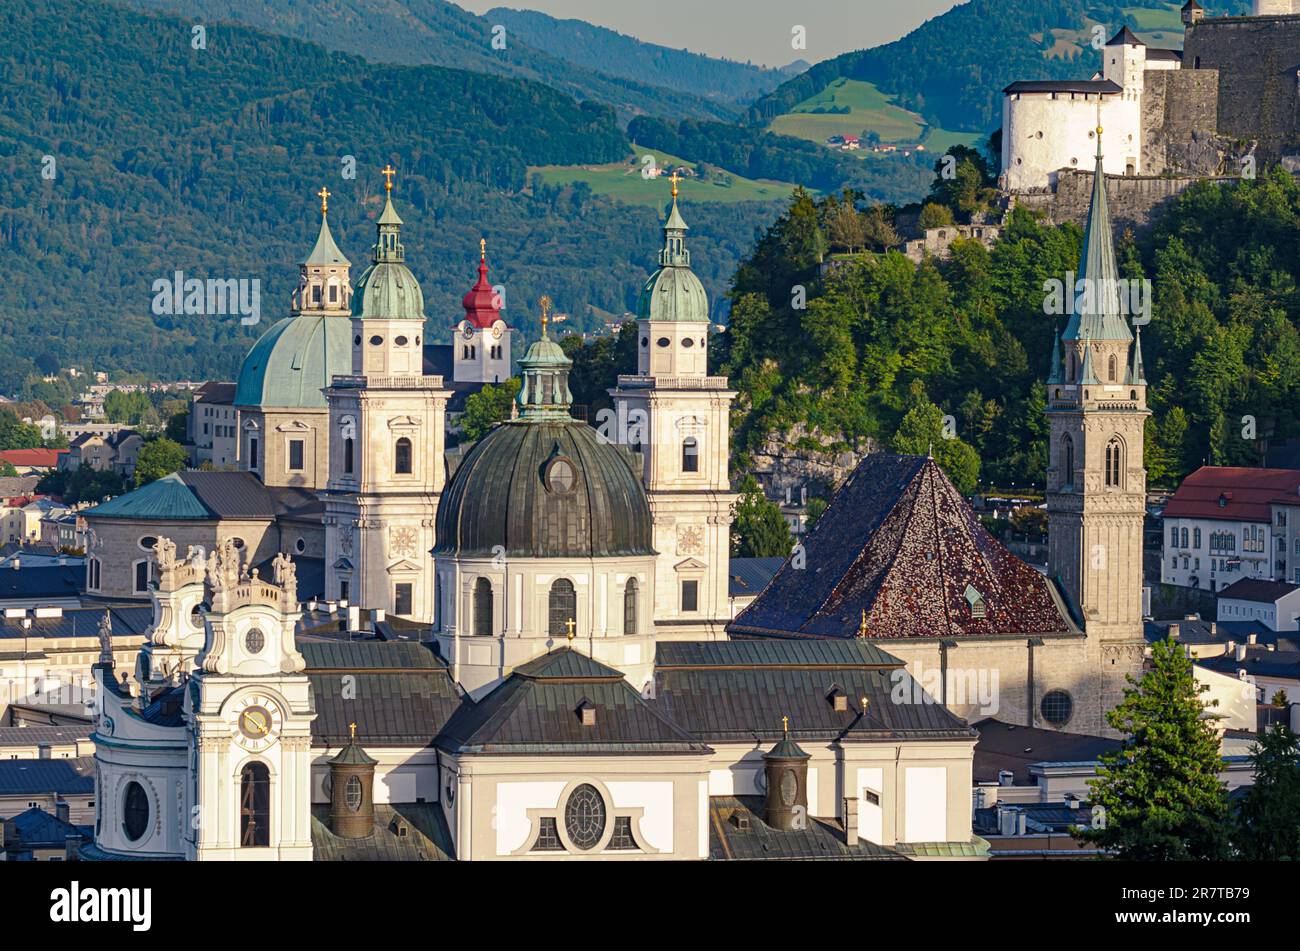 Salzburg, city in Austria, view at the old town and historic centre, with Collegiate Church, Franciscan Church and Salzburg Cathedral. Stock Photo